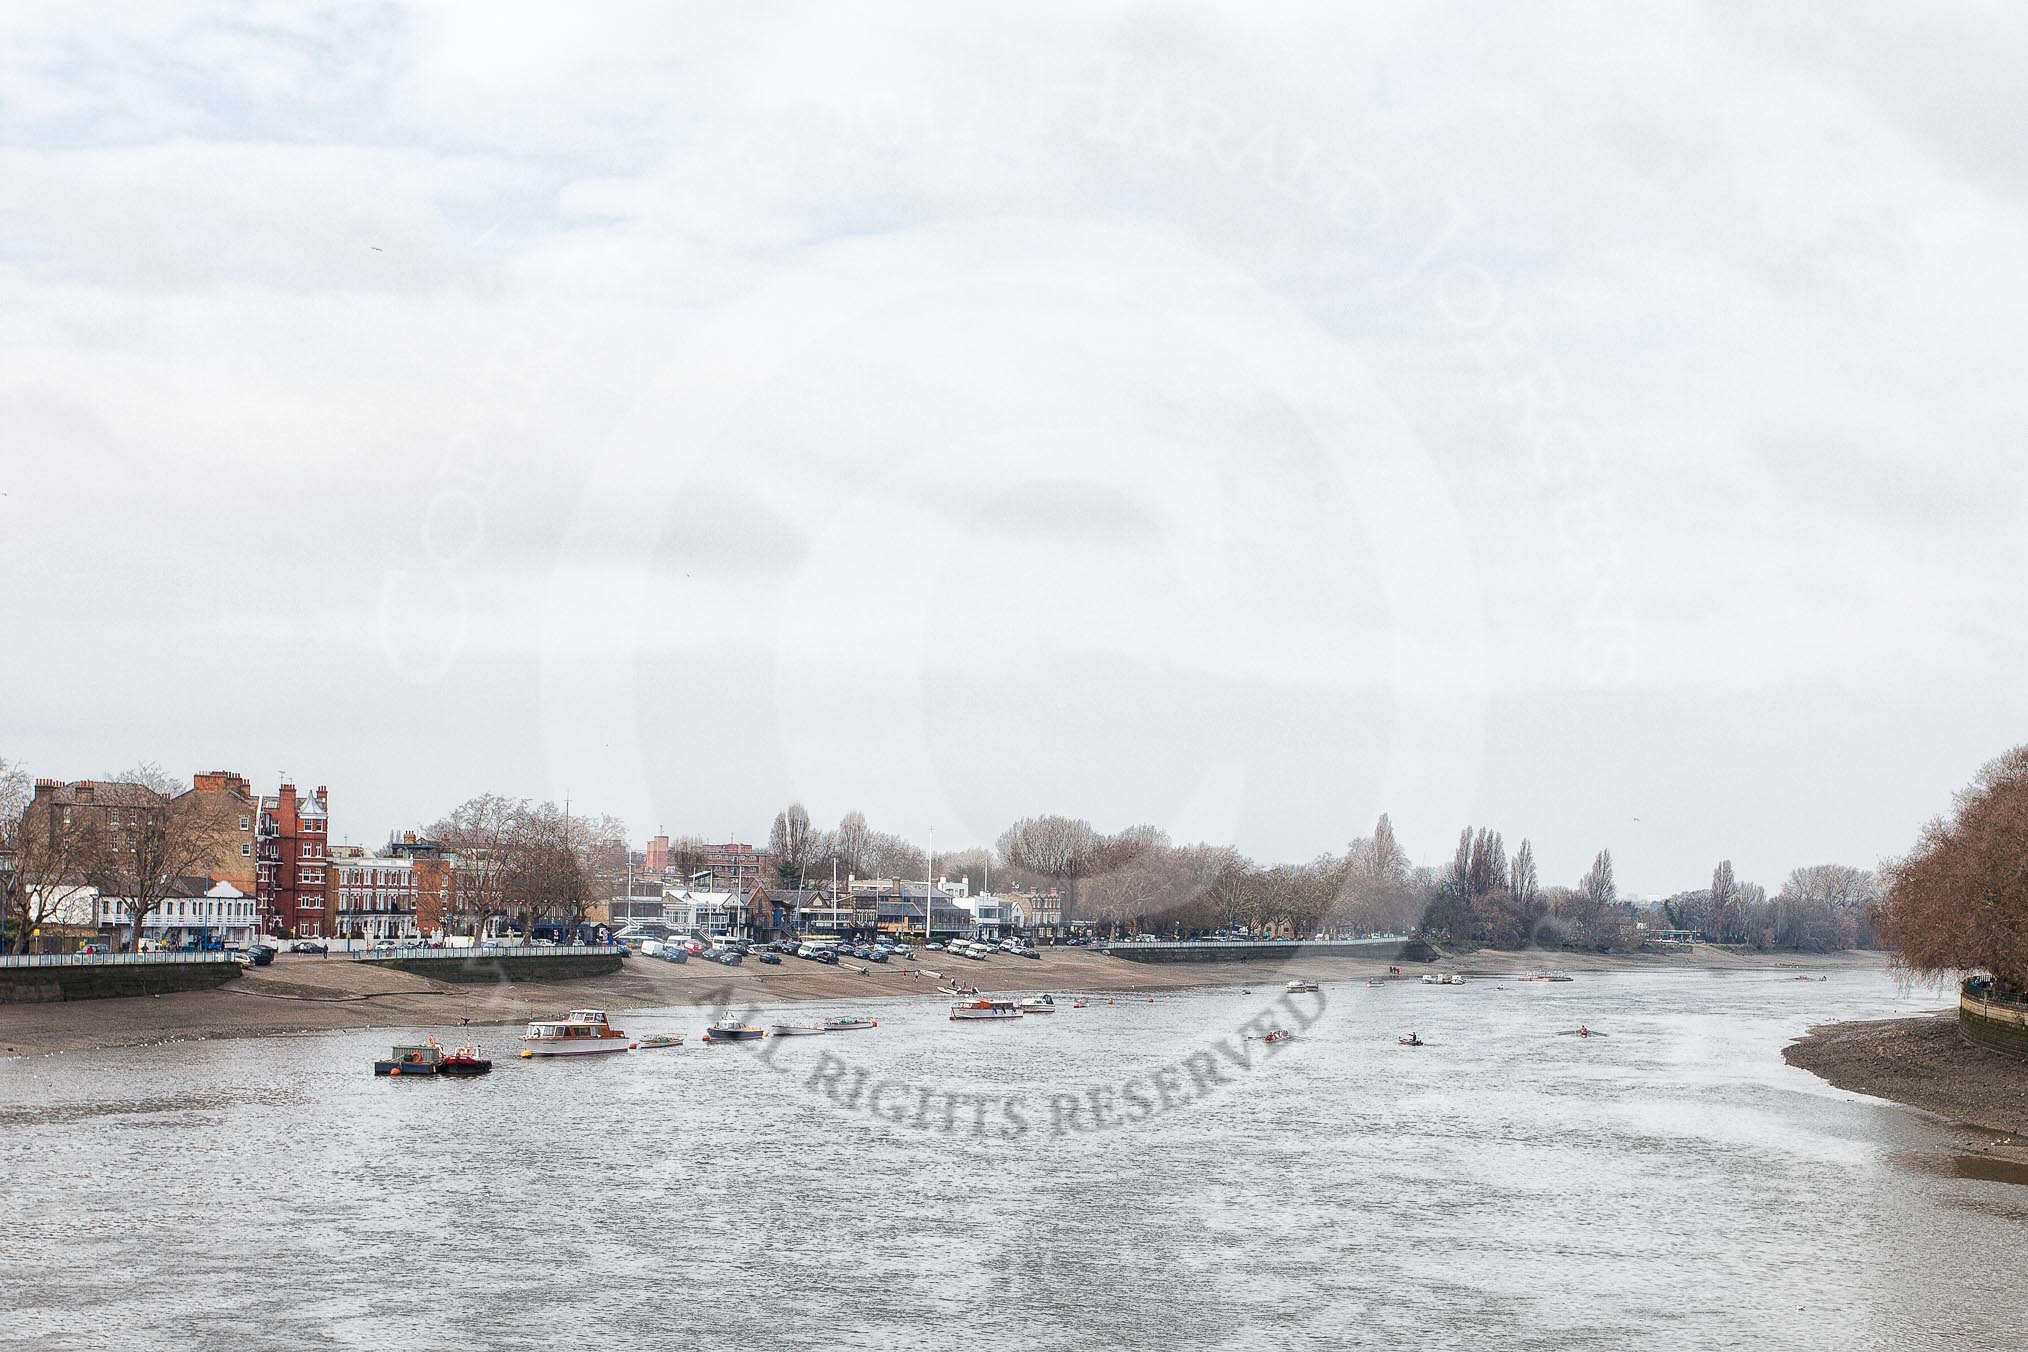 The Boat Race season 2012 - fixture CUBC vs Leander: The River Thames seen from Putney Bridge looking upstream towards the West..
River Thames between Putney and Molesey,
London,
Greater London,
United Kingdom,
on 10 March 2012 at 12:09, image #3